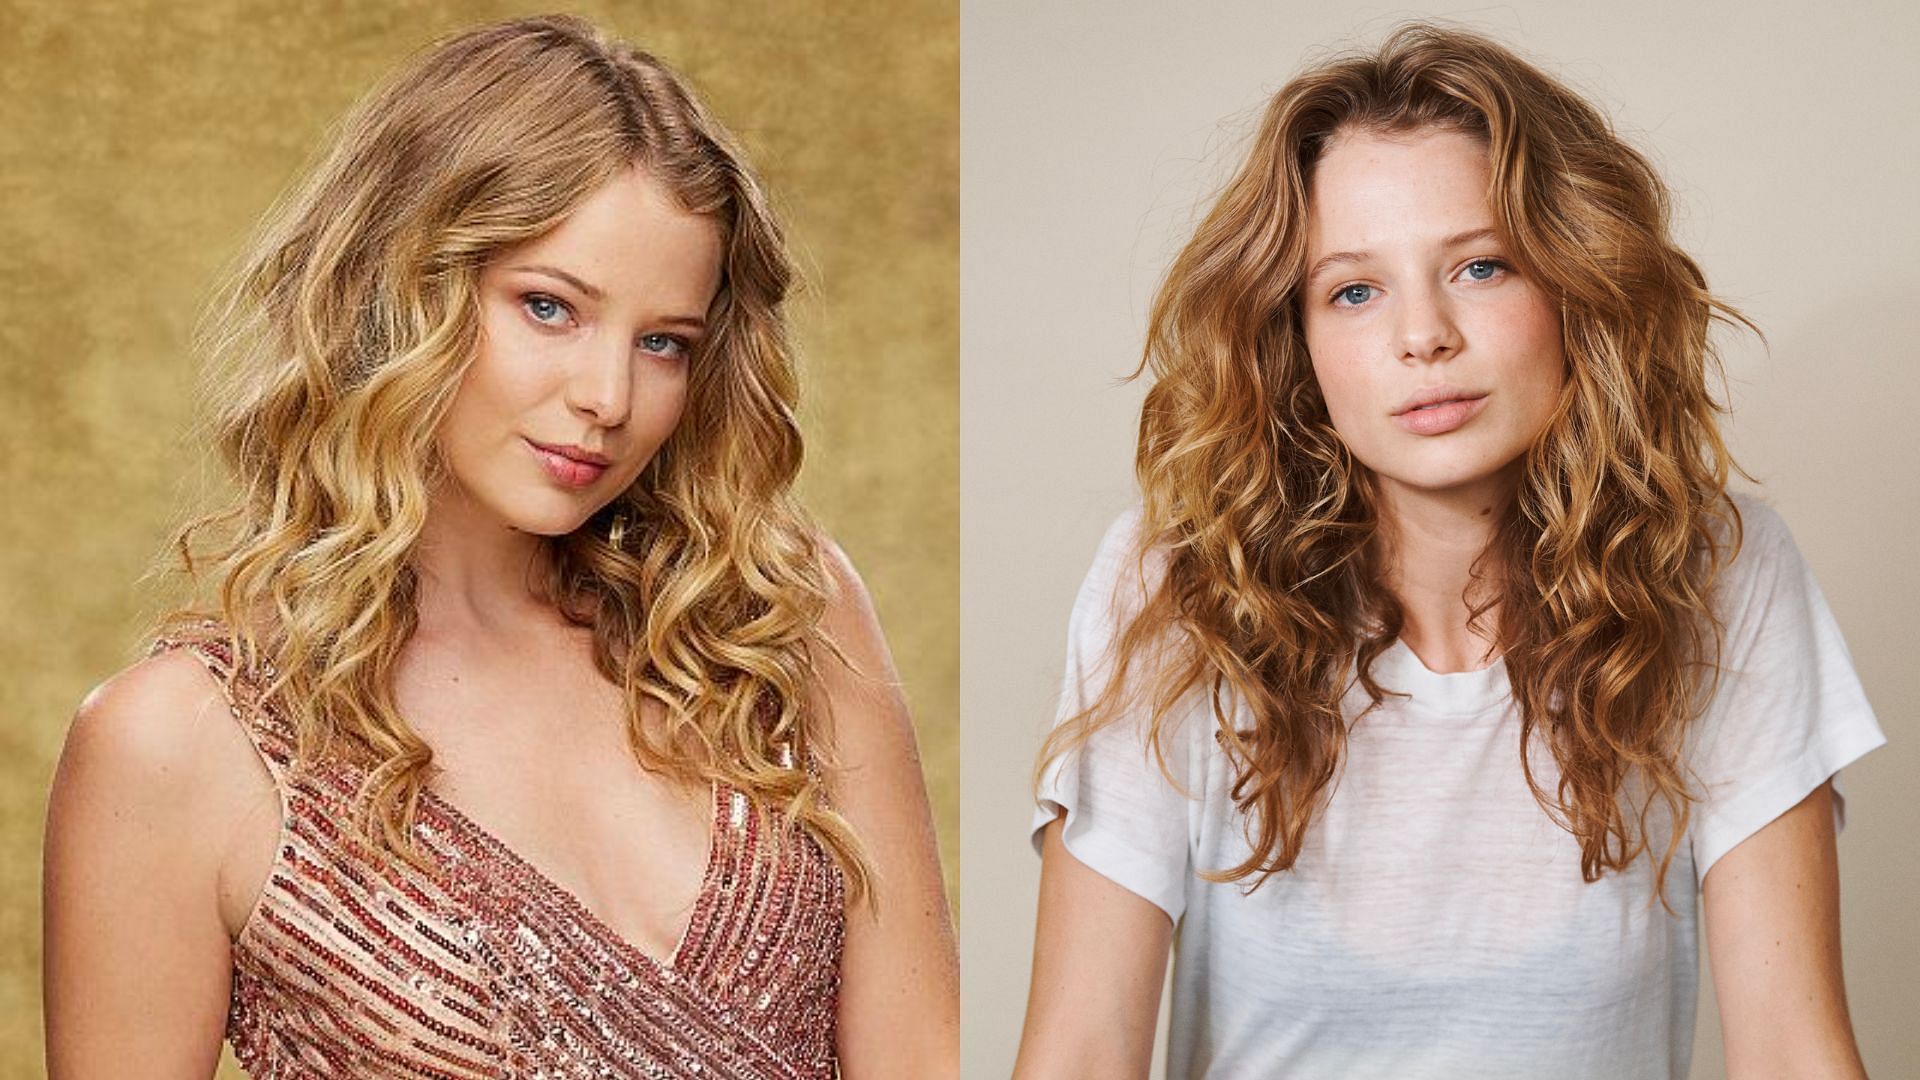 Allison Lanier plays Summer Newman in The Young and the Restless (Images via CBS and IMDb)